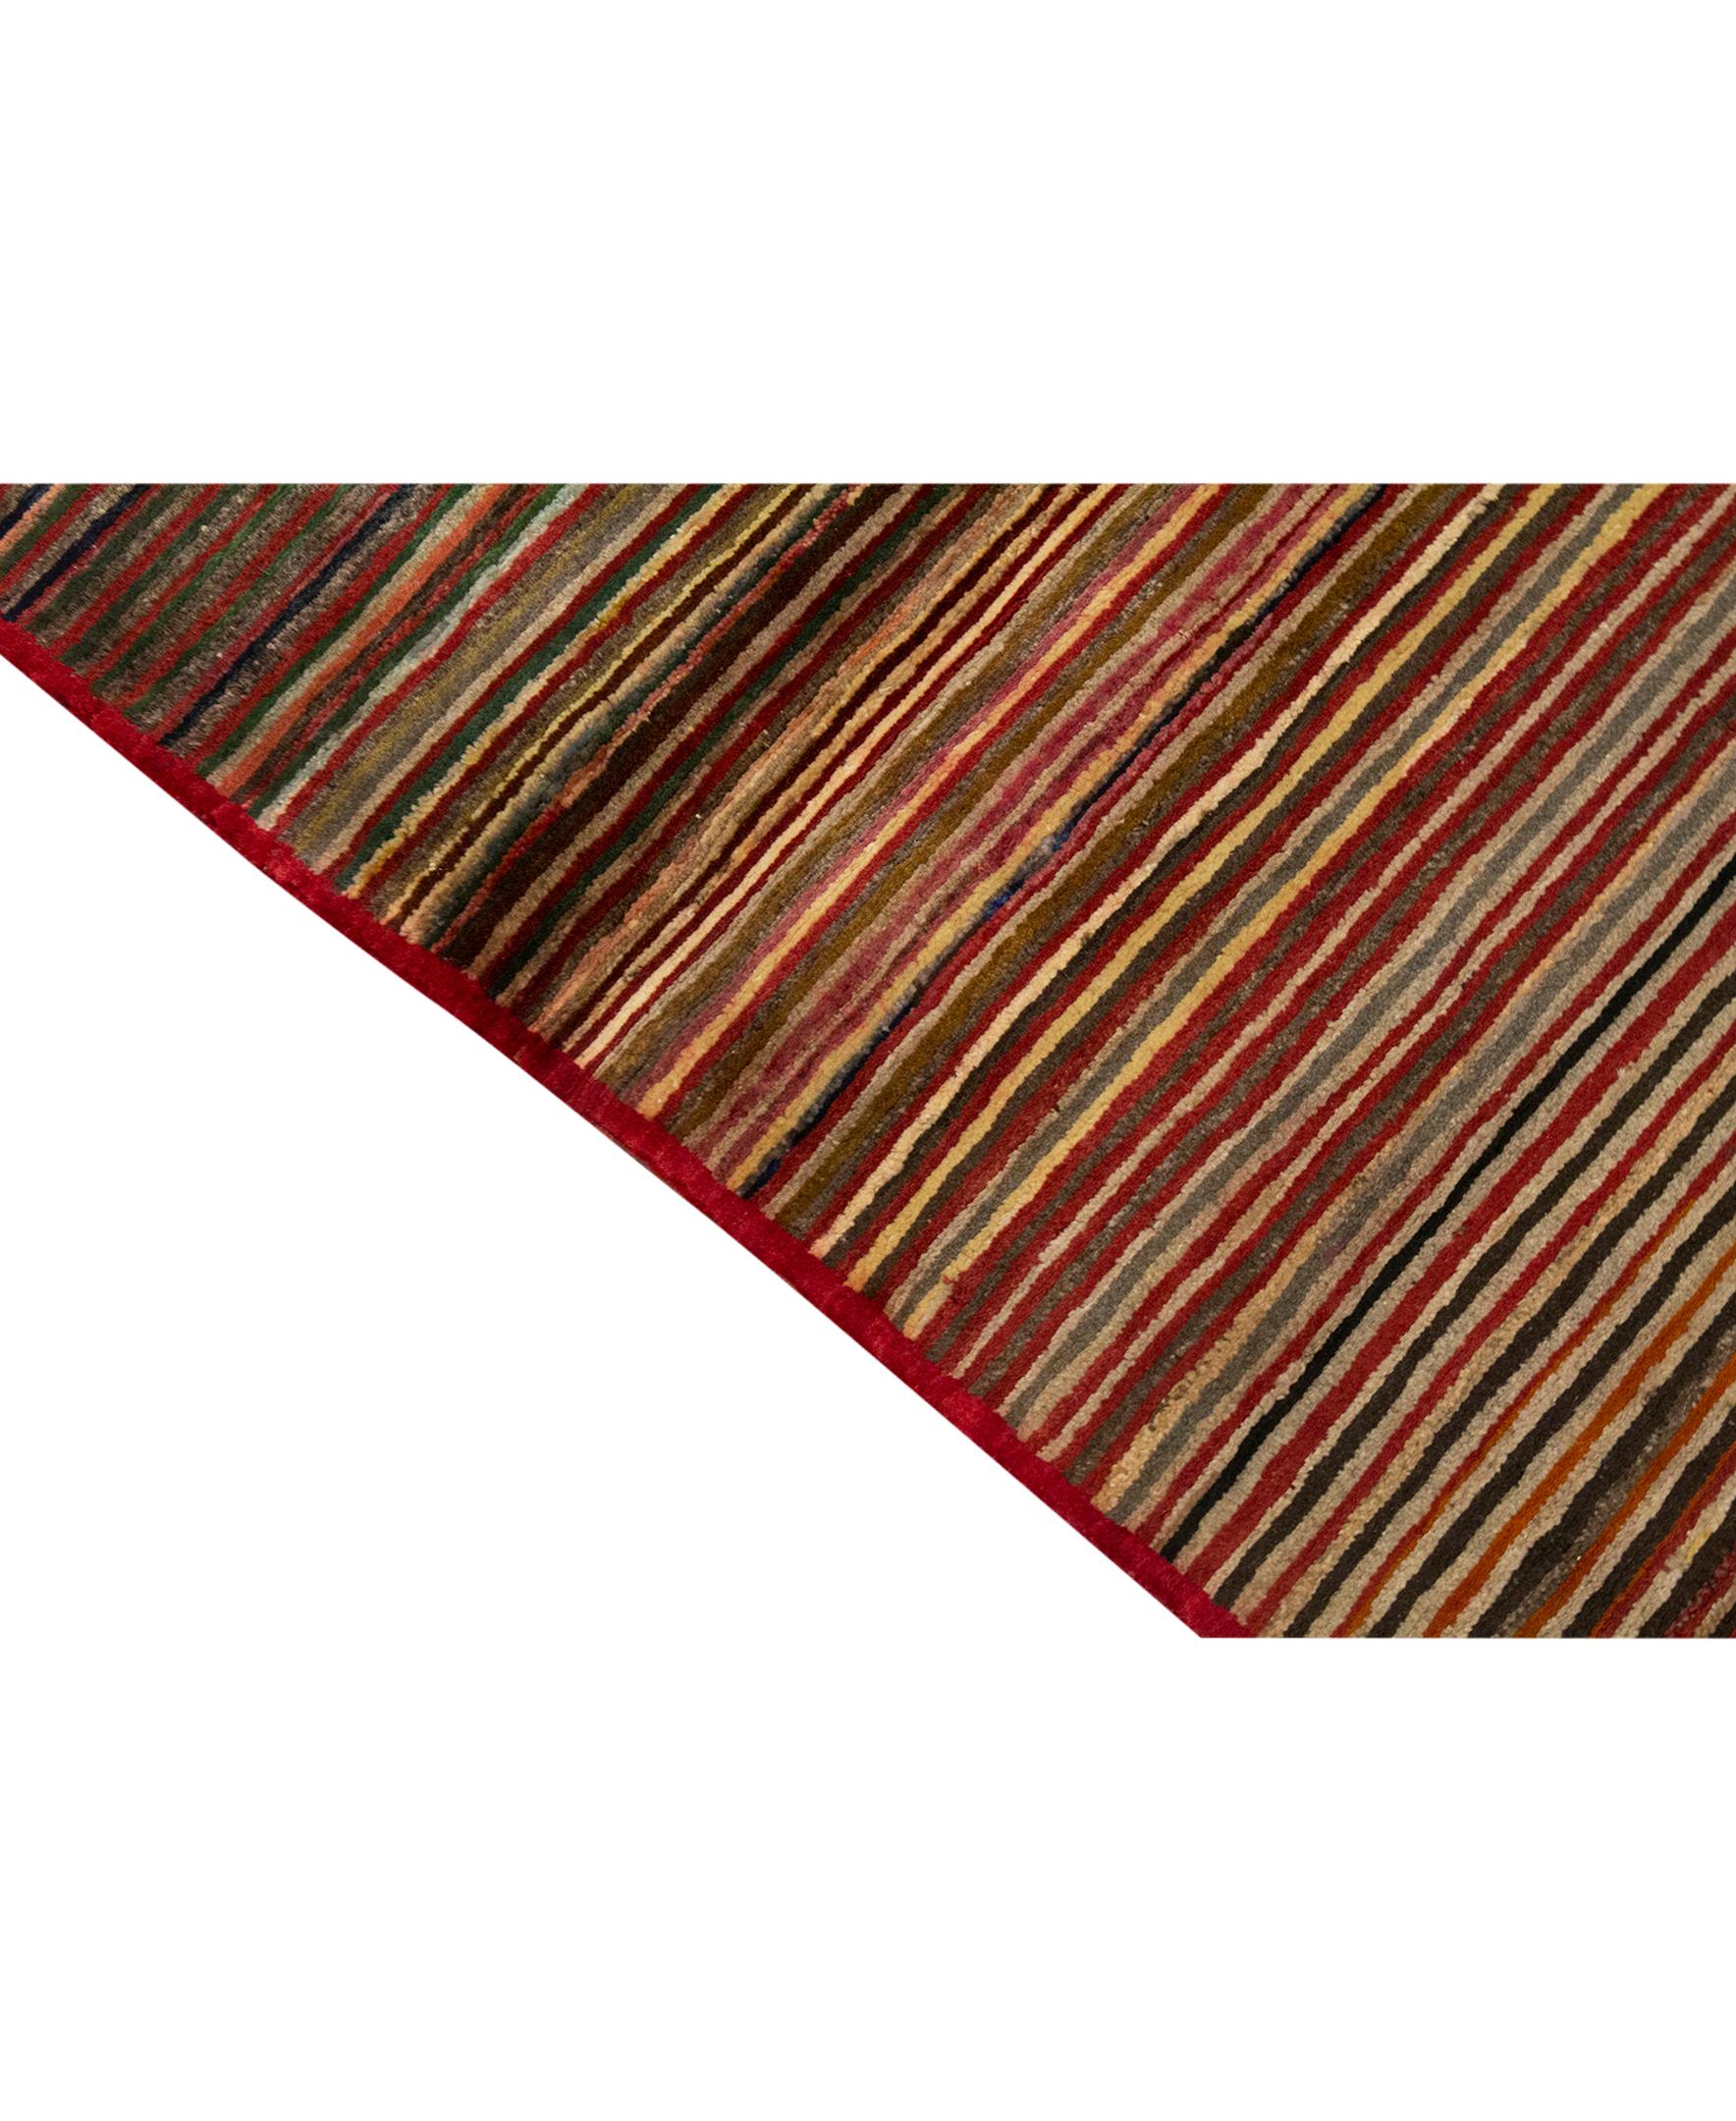 Luxury Contemporary Handmade Stripes Red / Ivory Area Rug. Measures: 4' x 6'.